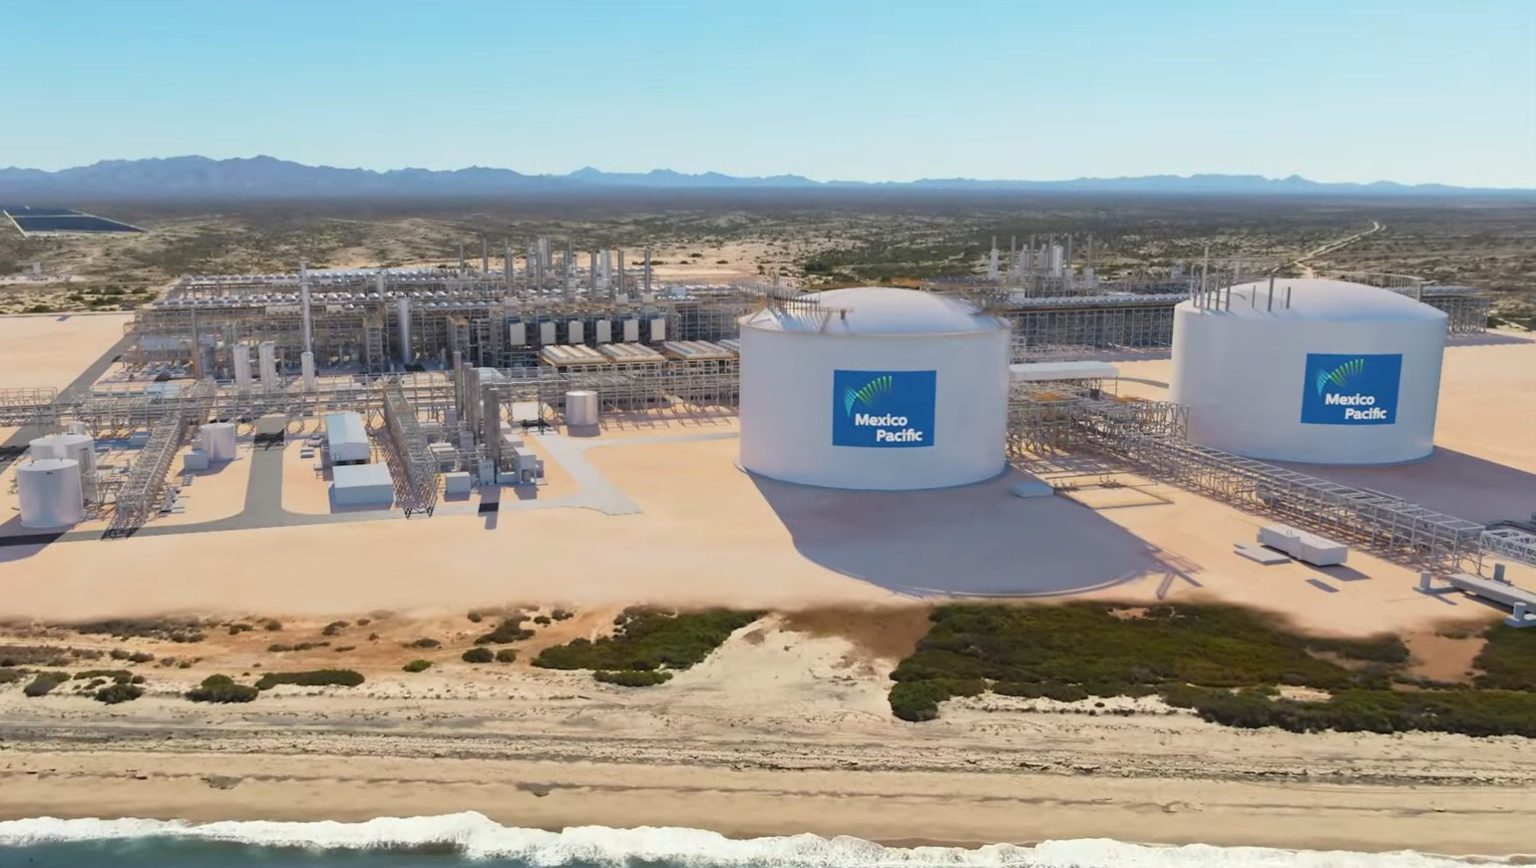 Mexico Pacific pens 20-year LNG supply deal with Woodside